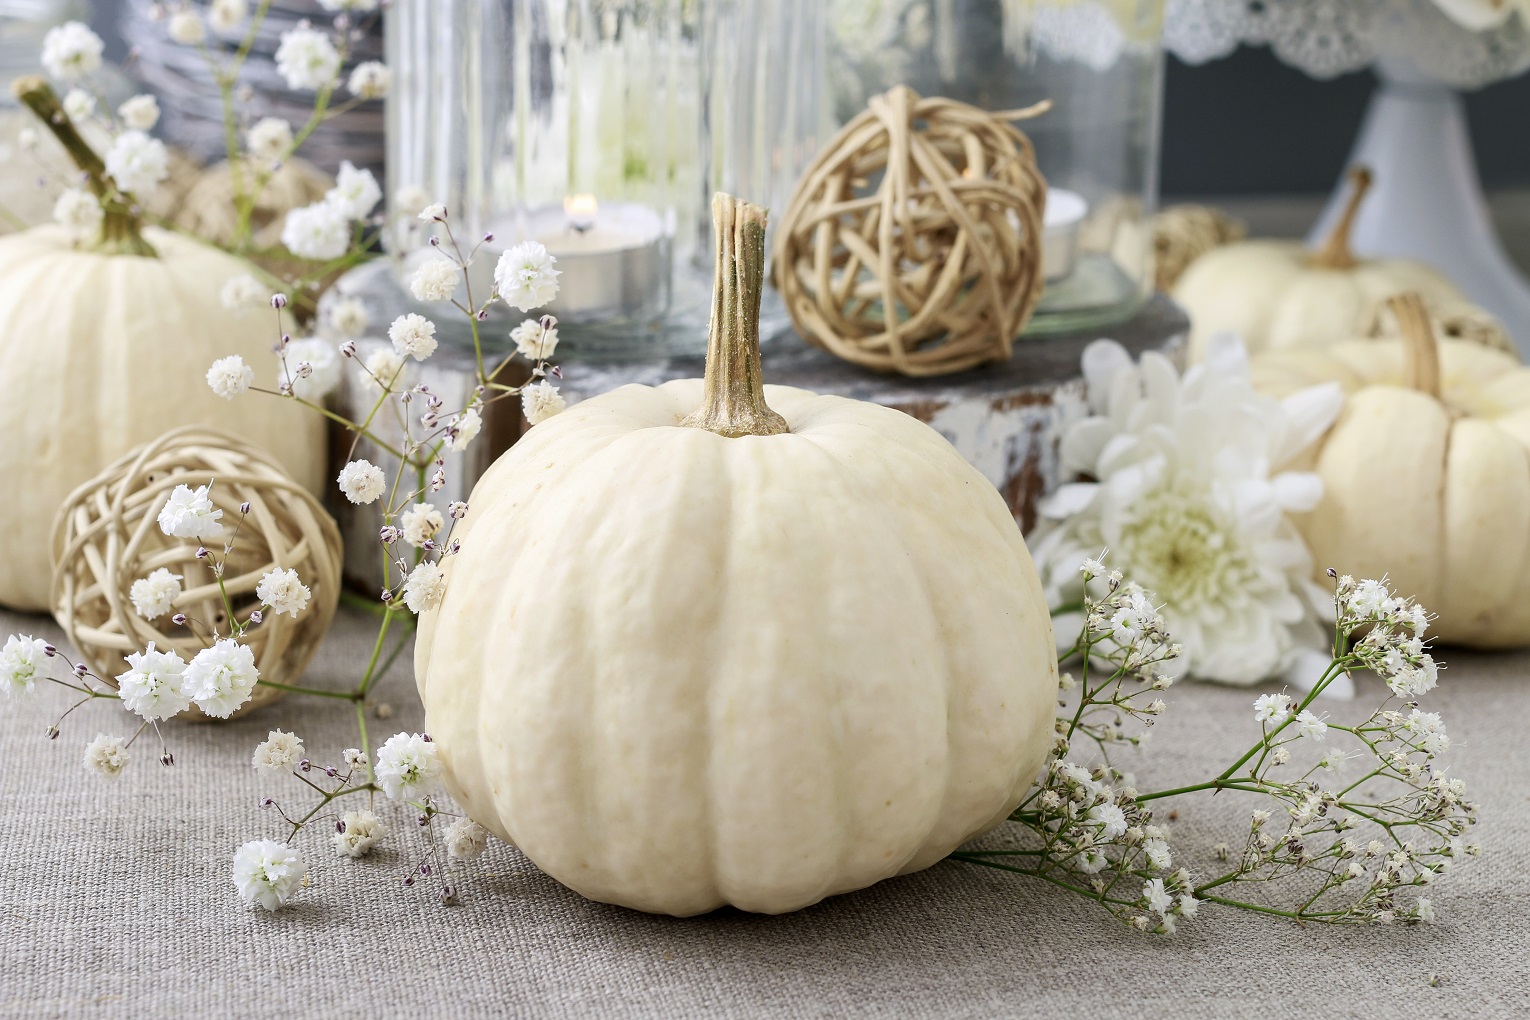 seasonal decorating ideas floral decoration with white pumpkins called baby boo and chrysanthemum flowers.